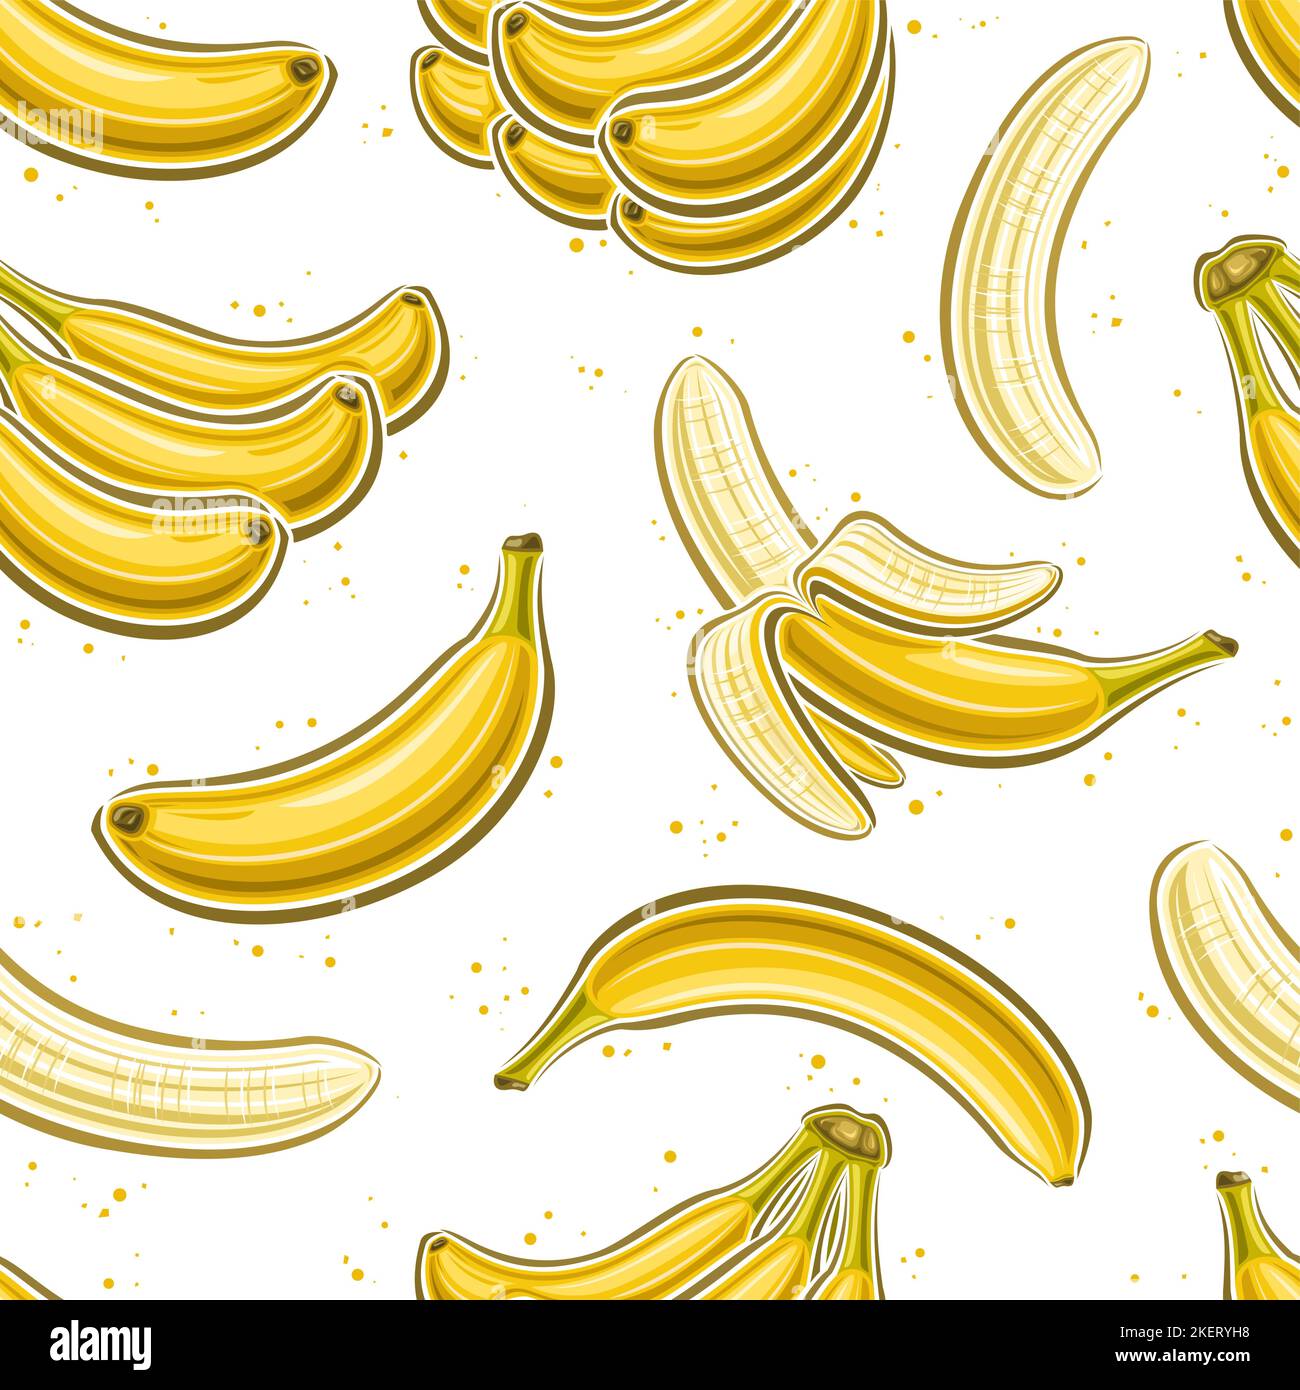 Vector Banana Seamless Pattern, square repeating background with cut out illustrations of single opened and closed ripe bananas, group of flat lay ban Stock Vector